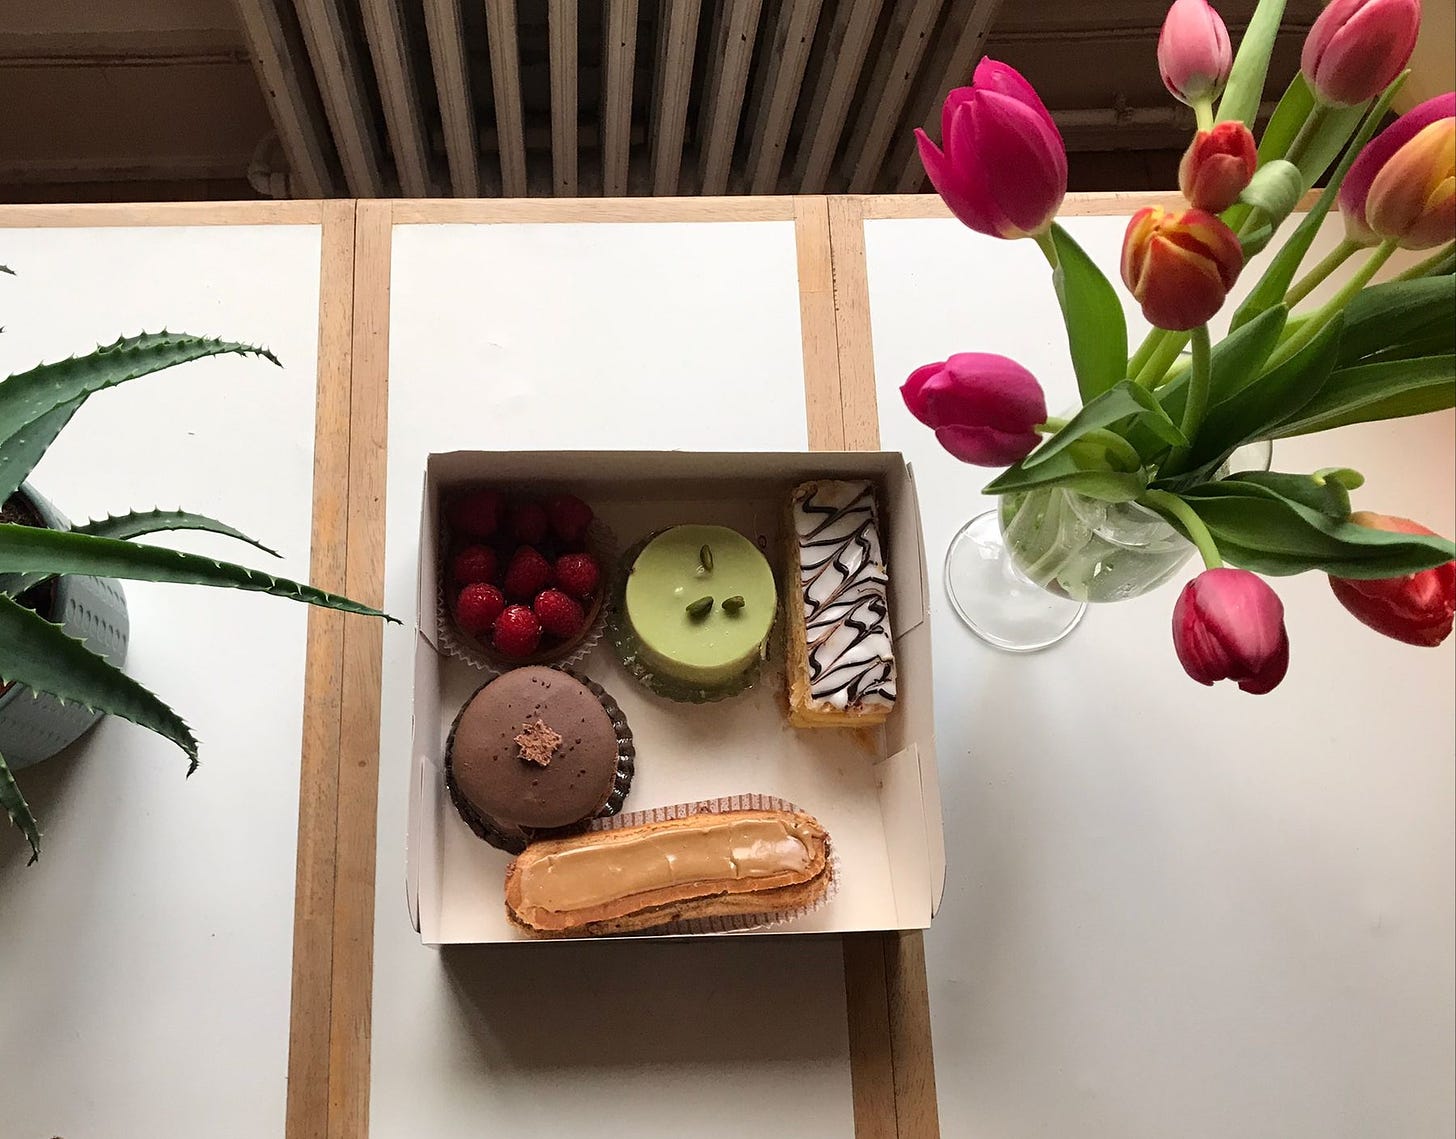 A box of assorted French patisseries, including a giant chocolate macaron and raspberry tarte on a table alongside a vase of roses and an aloe plant